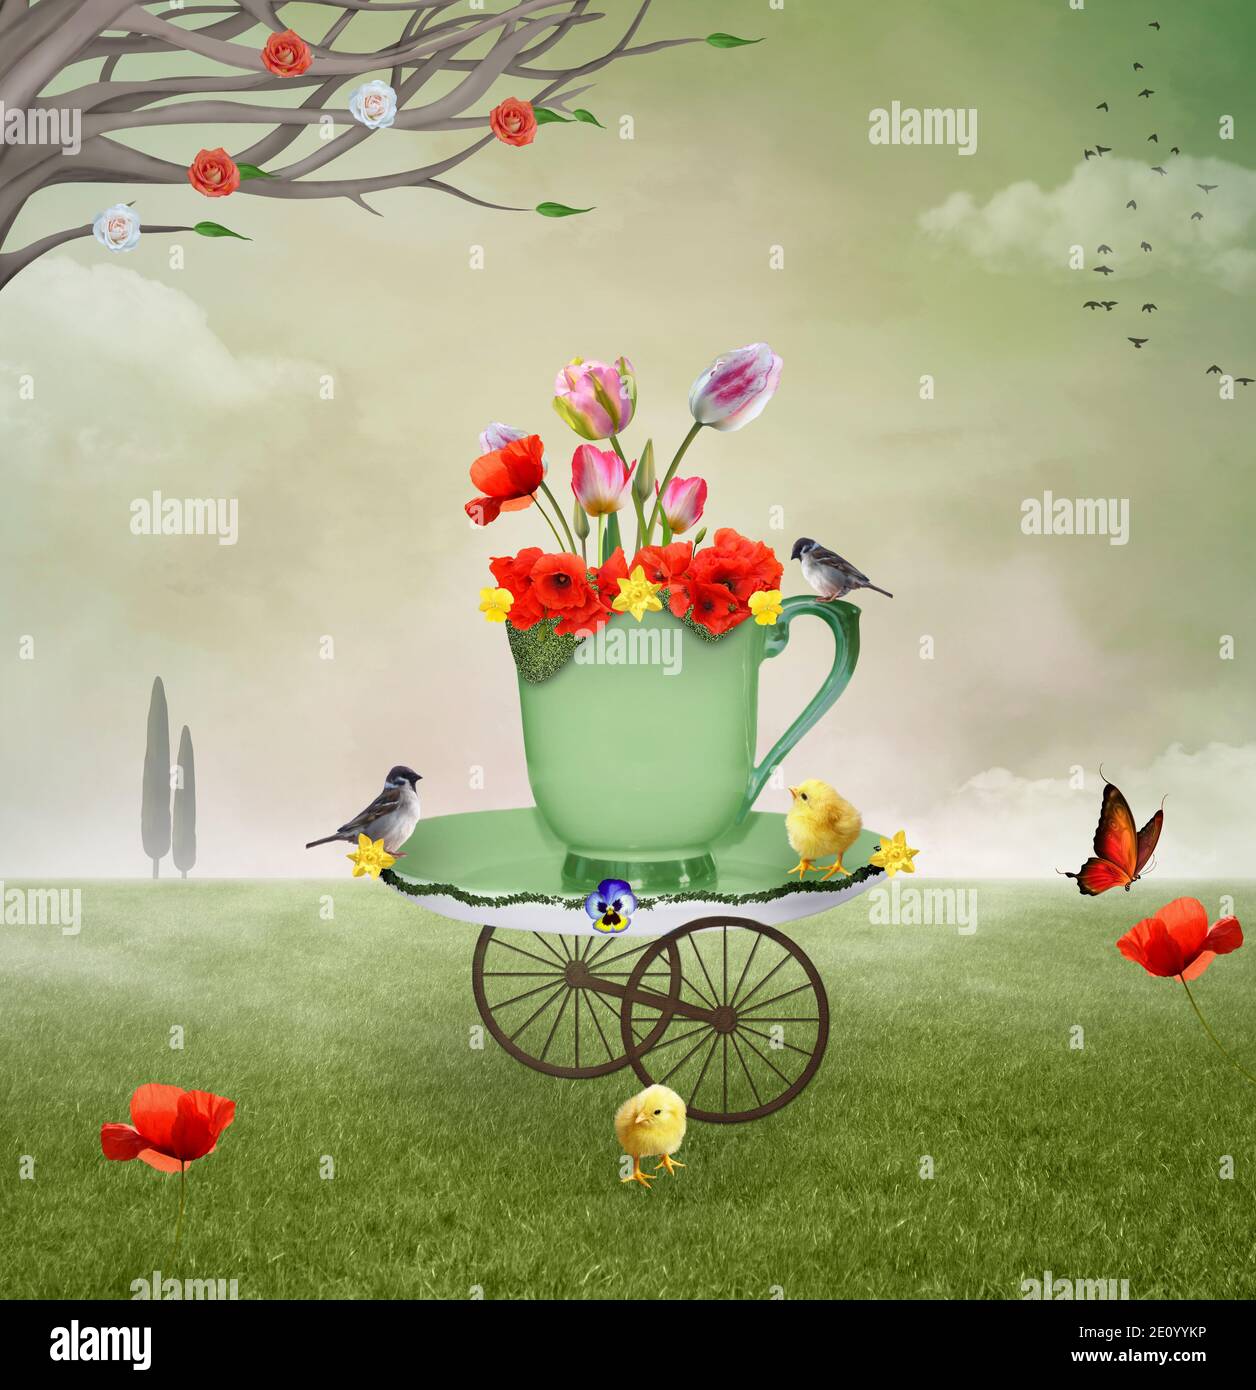 Surreal countryside illustration with a cup full of flowers in a green field Stock Photo